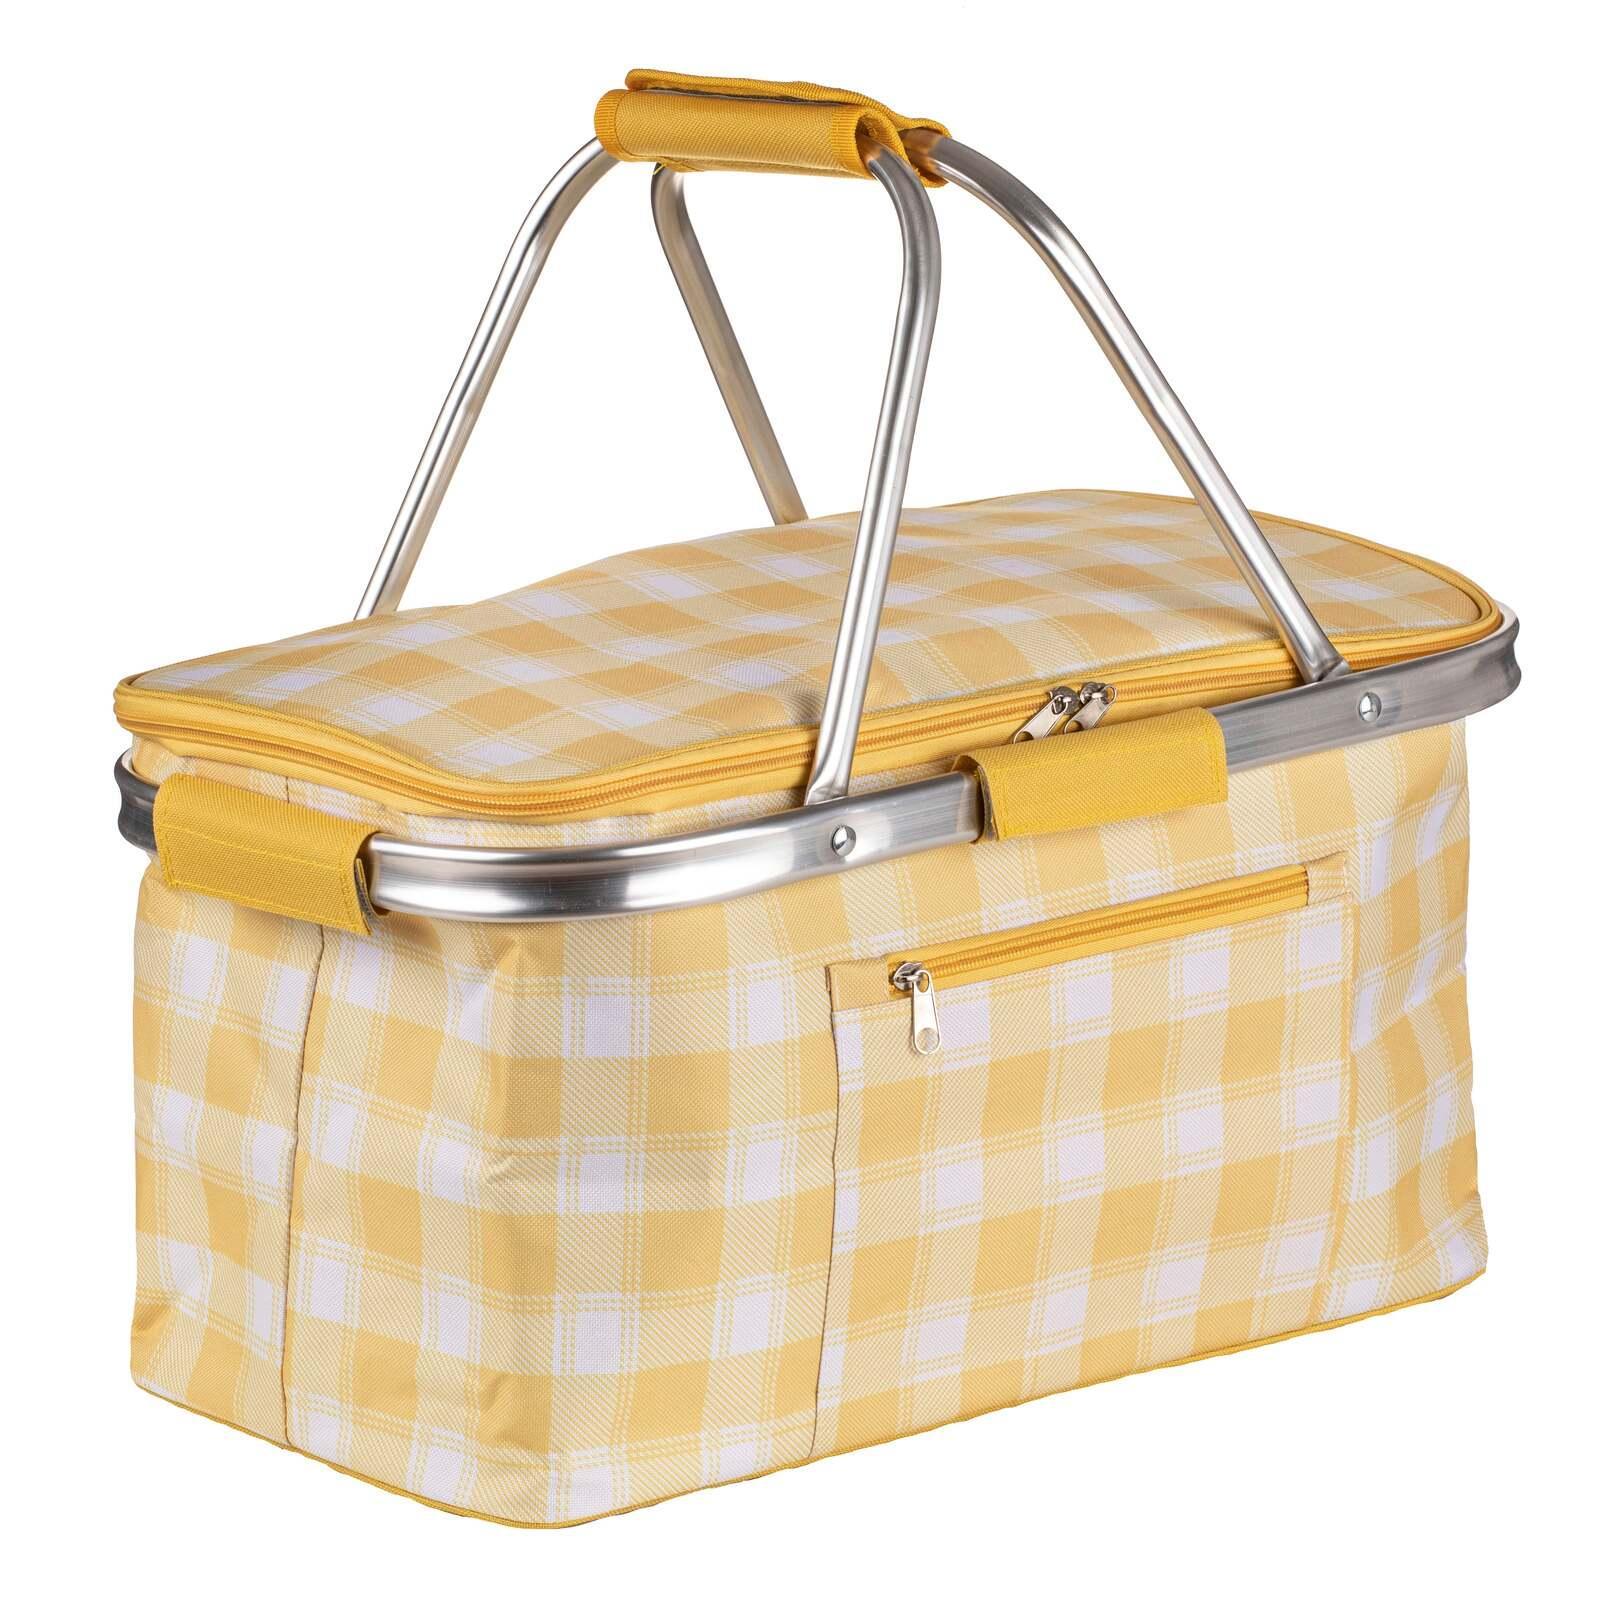 Delilah Insulated 46x24cm Picnic Basket Outdoor Storage w/ Carry Handle Yellow